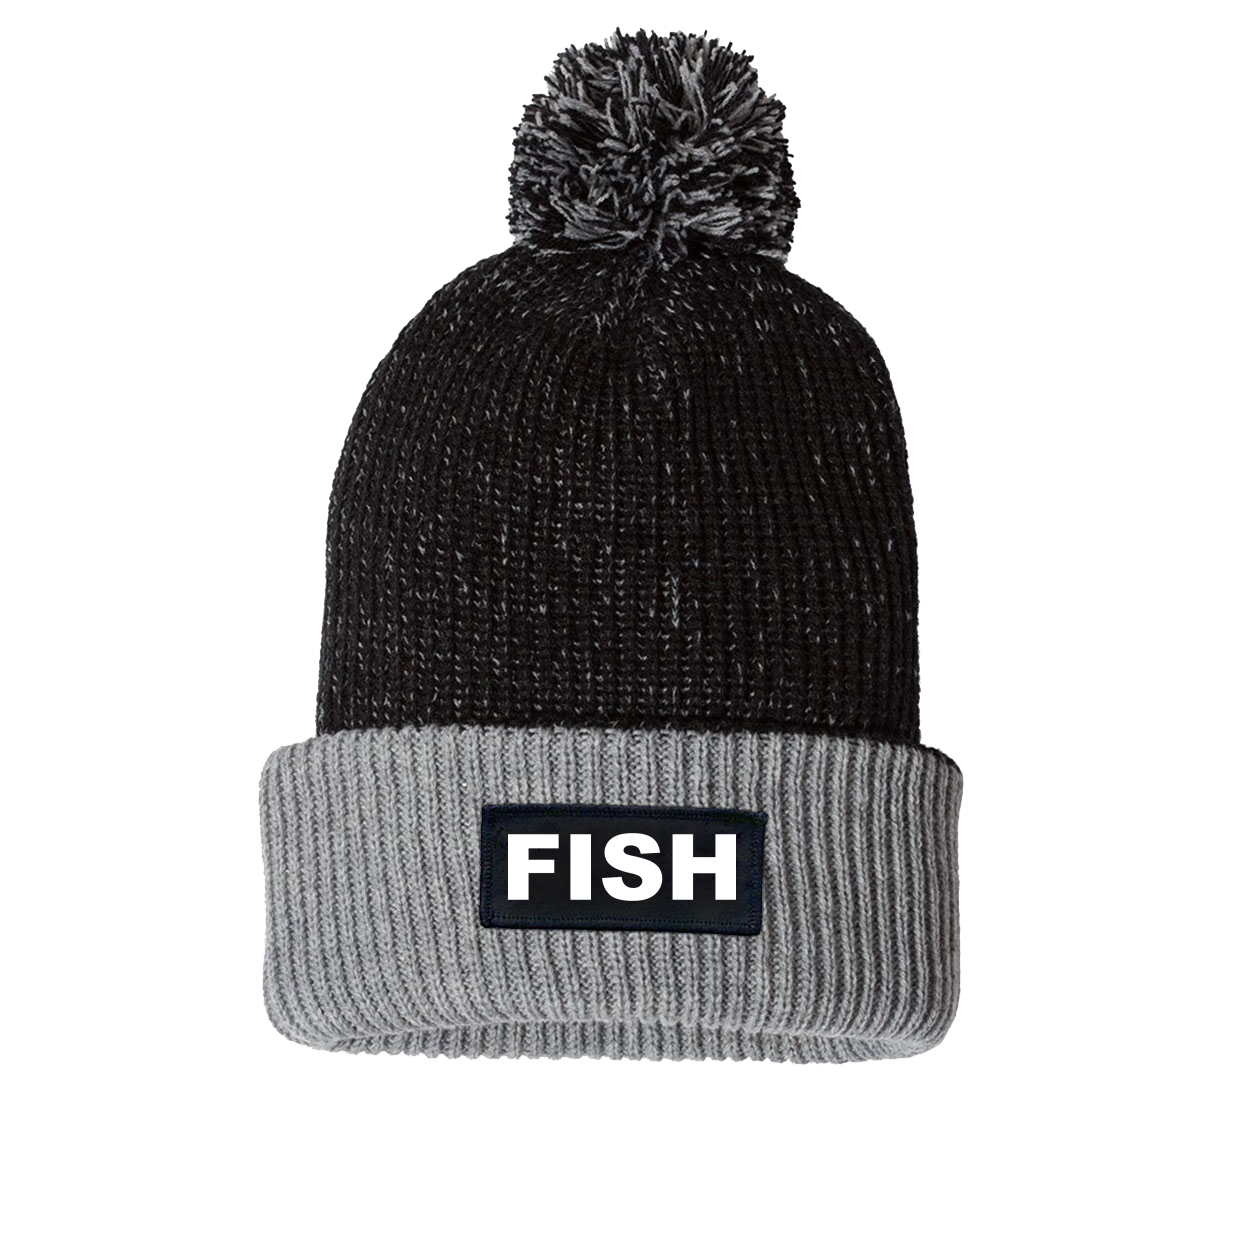 Fish Brand Logo Night Out Woven Patch Roll Up Pom Knit Beanie Black/Gray